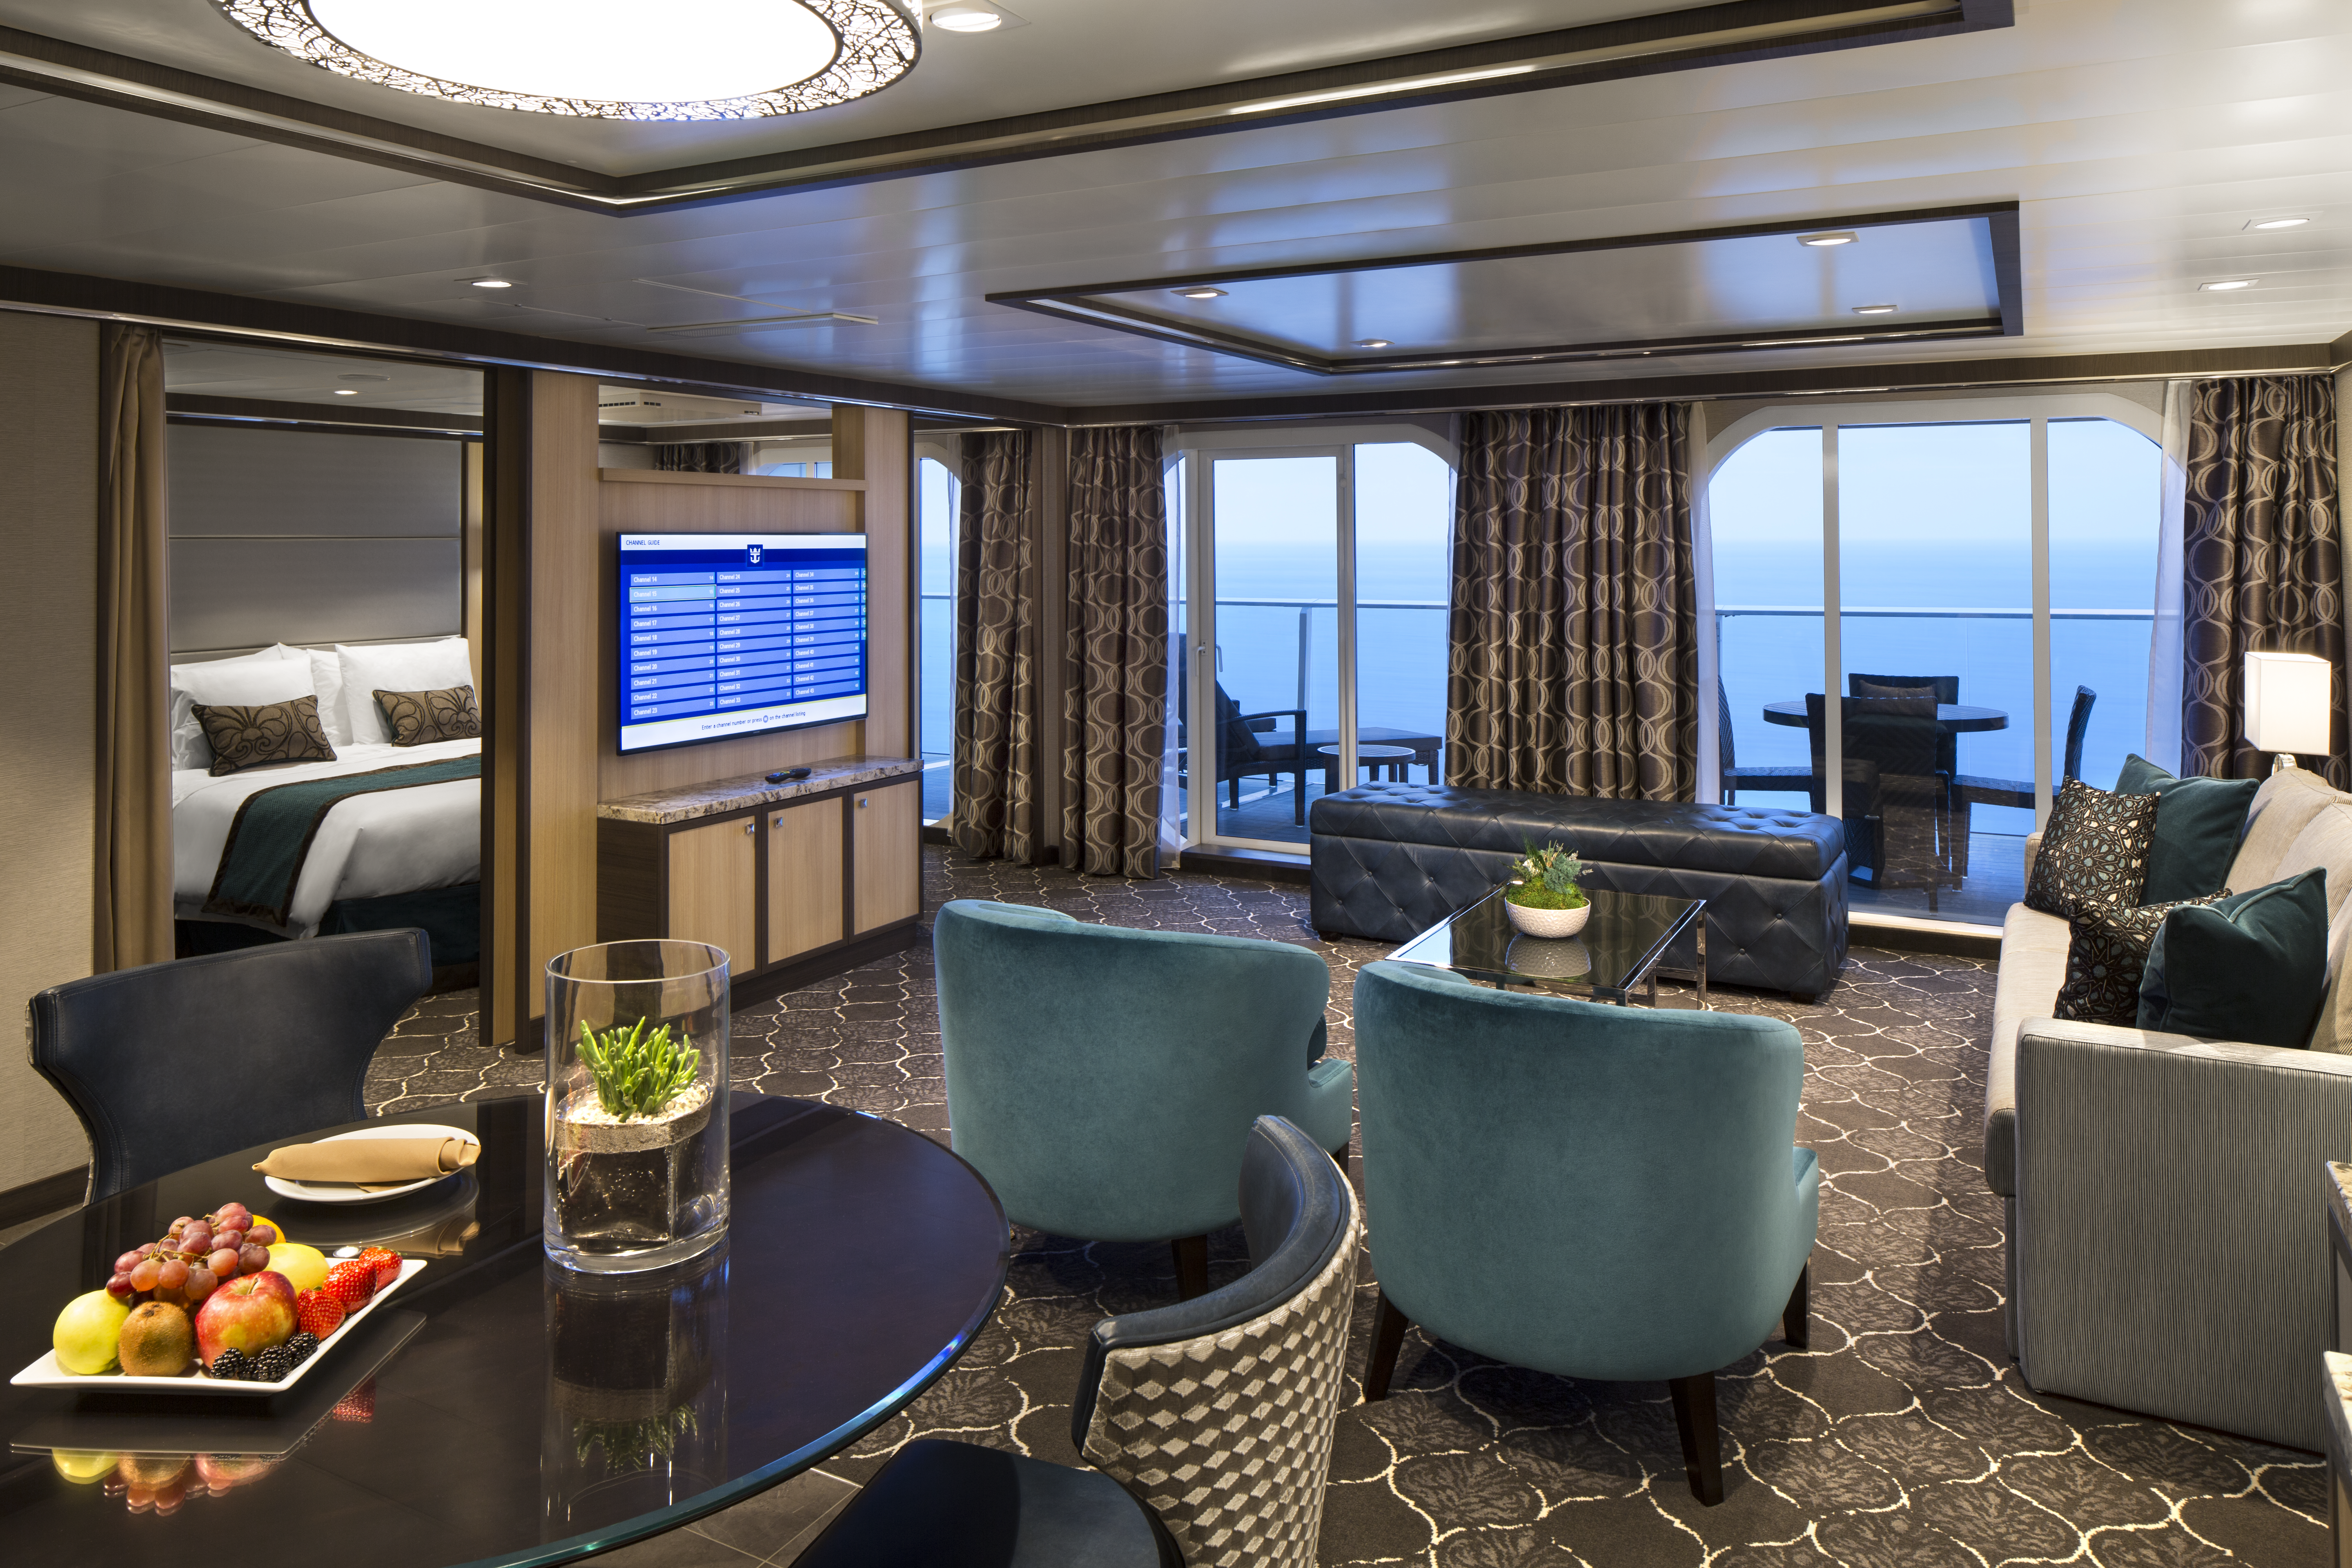 Symphony of the Seas Owner's Suite